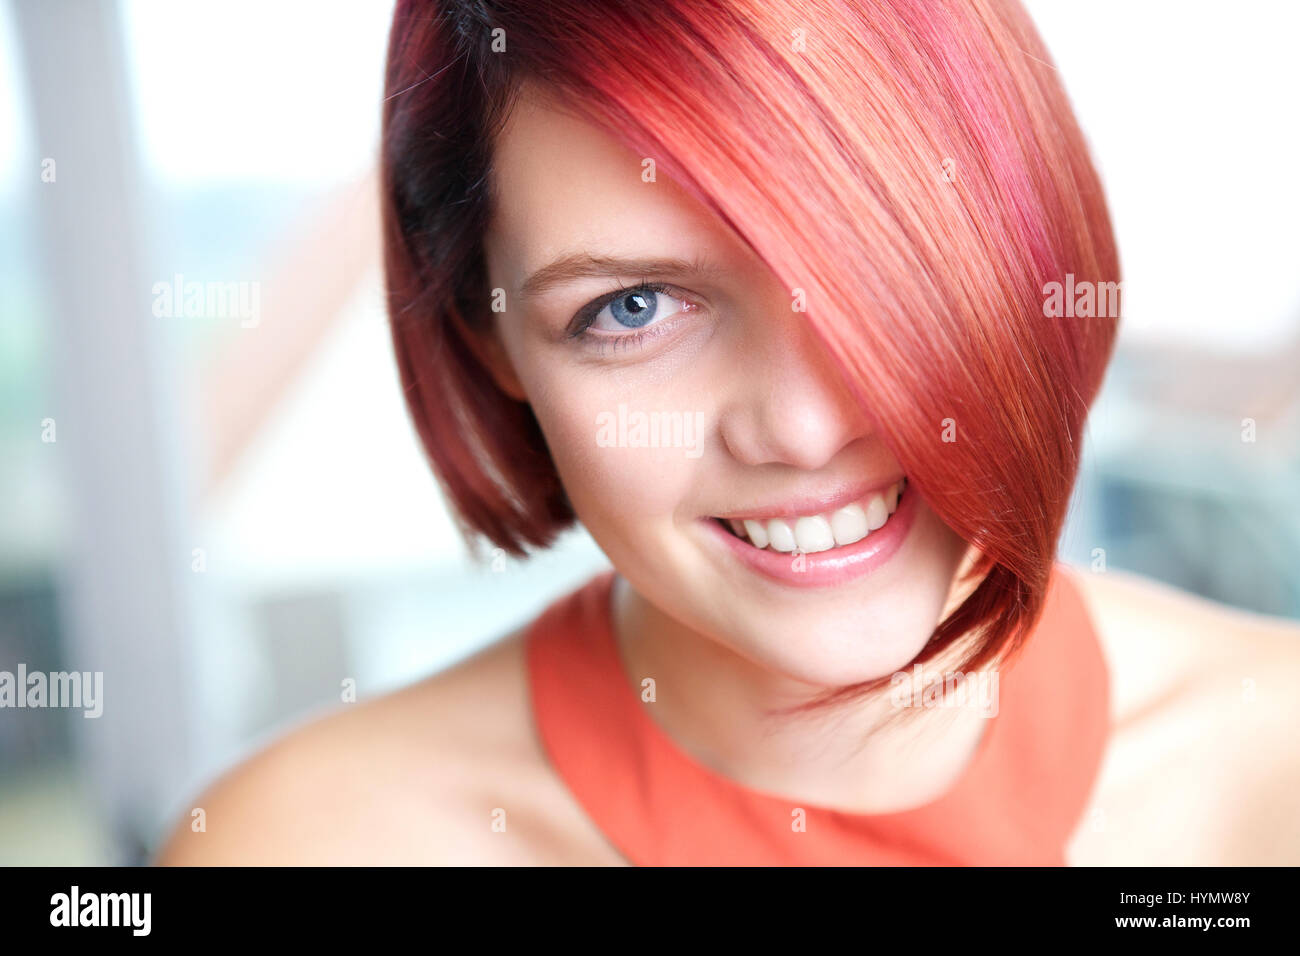 Candid portrait of a young woman smiling with red hair Stock Photo